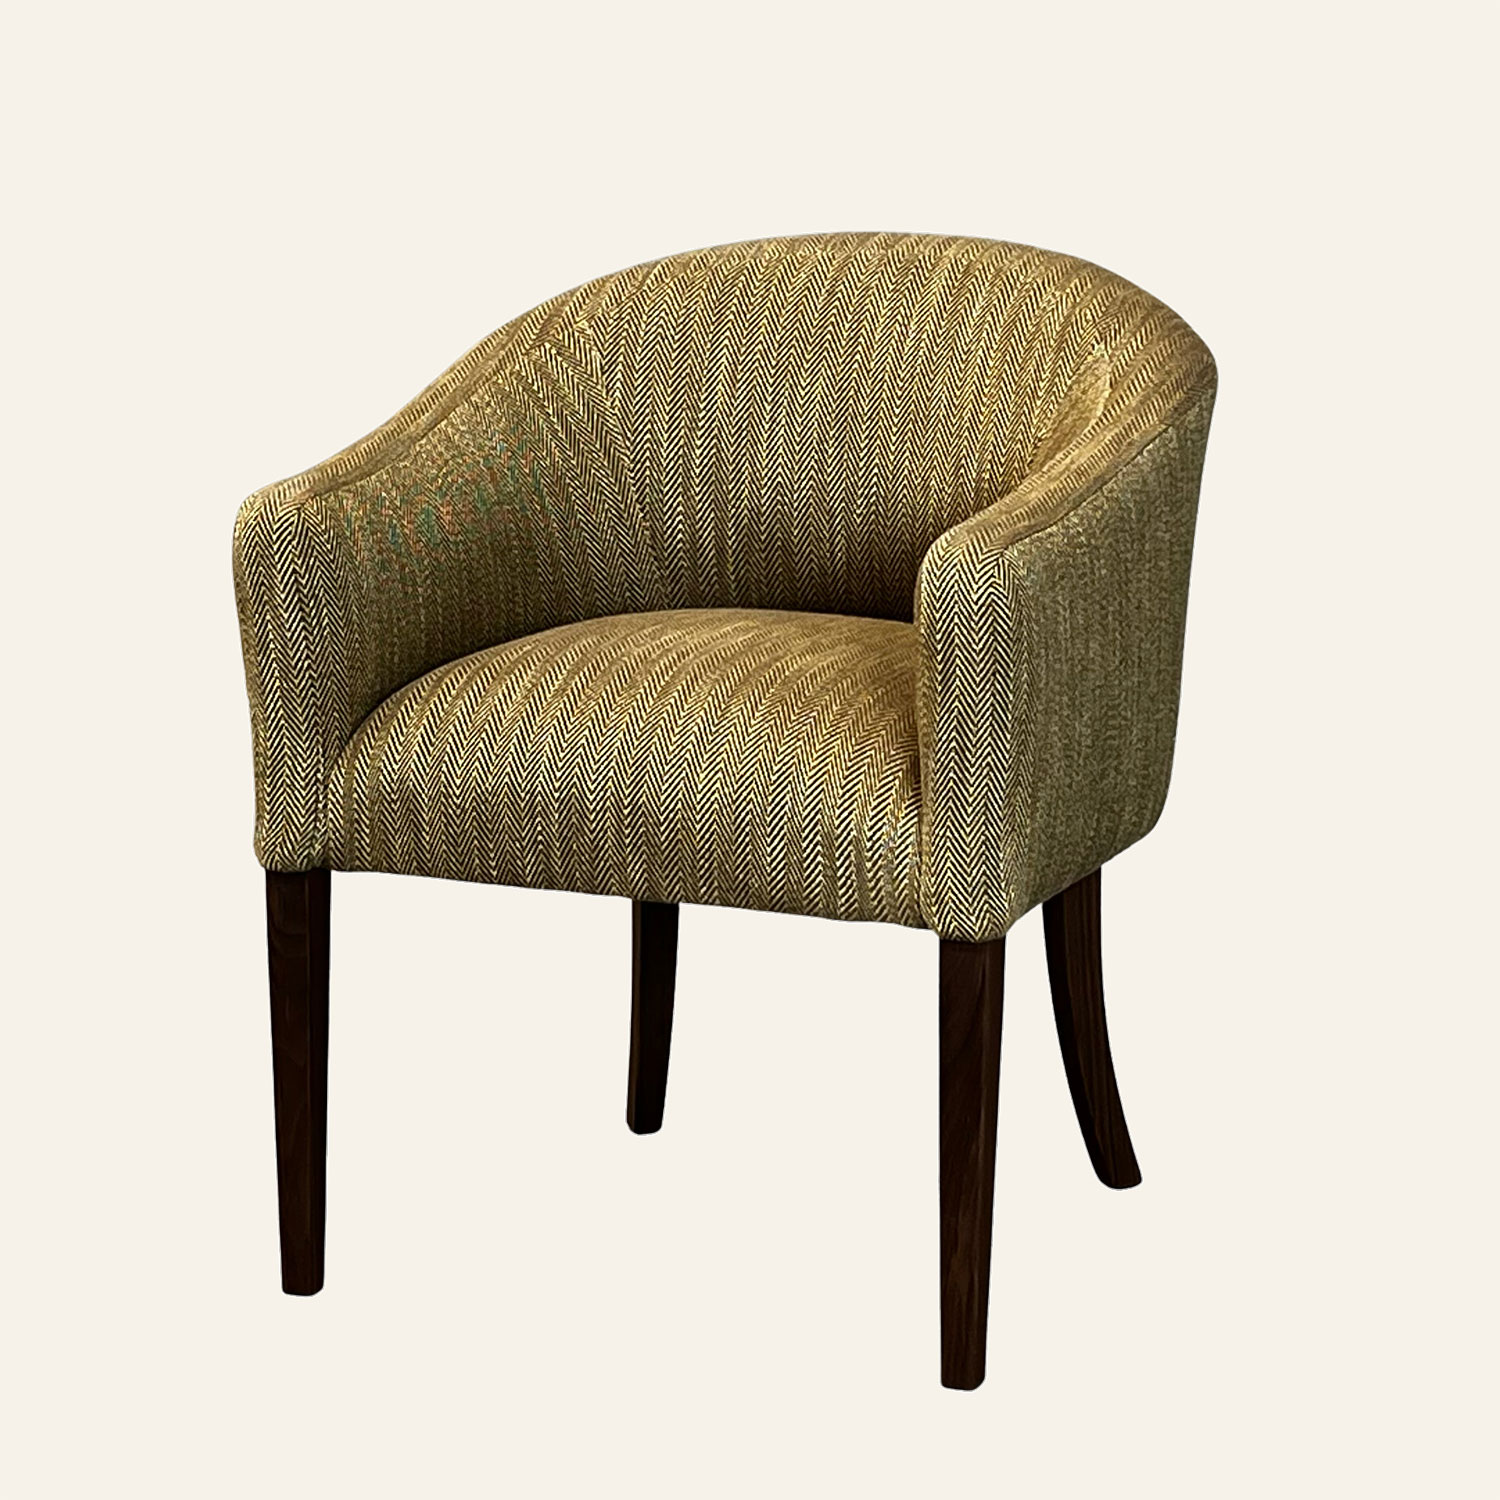 Vershire Dining Chair 261638